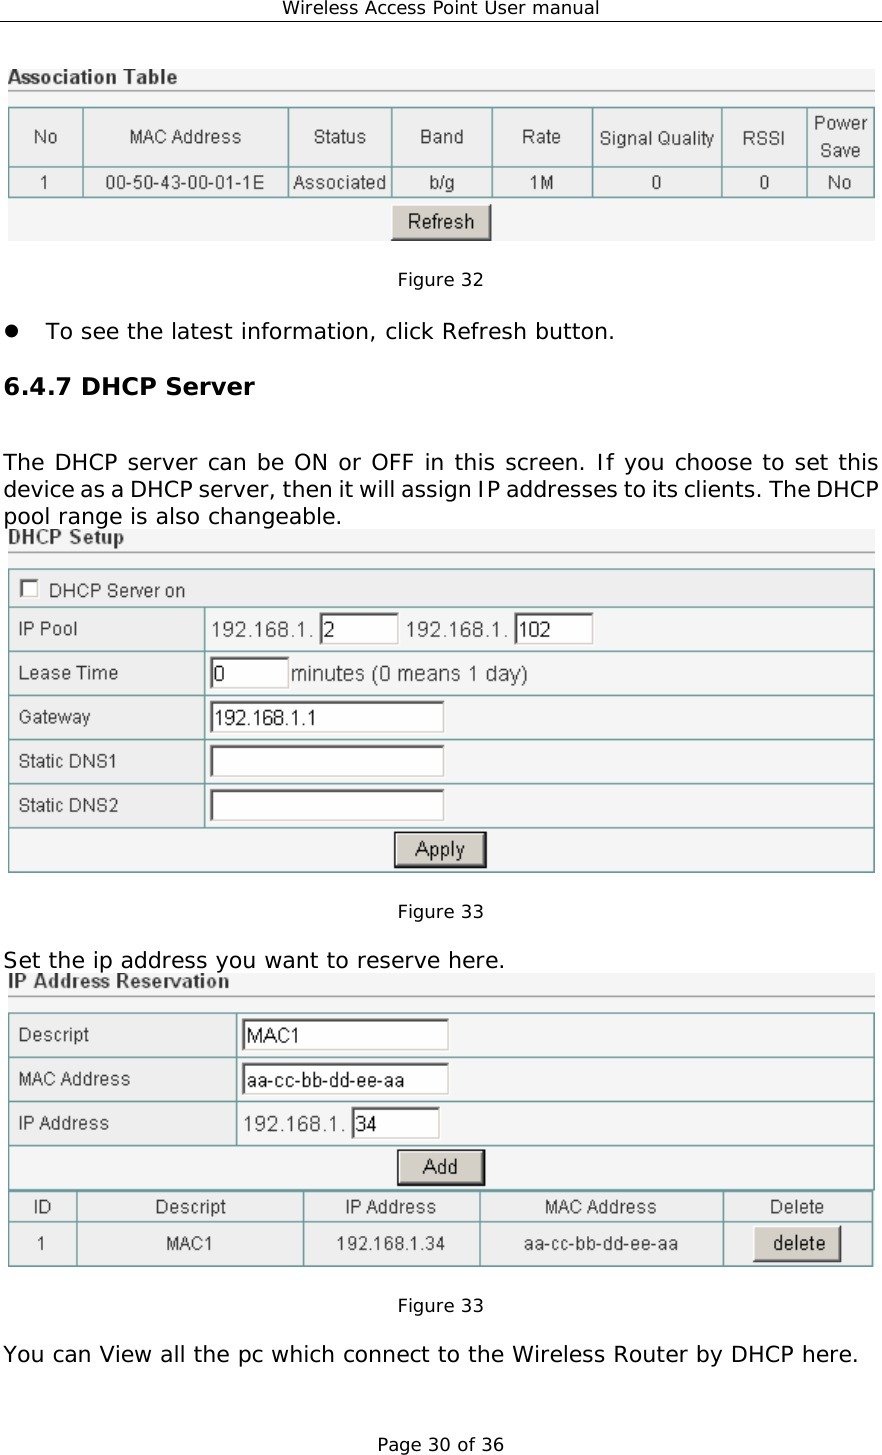 Wireless Access Point User manual Page 30 of 36   Figure 32  z To see the latest information, click Refresh button. 6.4.7 DHCP Server The DHCP server can be ON or OFF in this screen. If you choose to set this device as a DHCP server, then it will assign IP addresses to its clients. The DHCP pool range is also changeable.   Figure 33  Set the ip address you want to reserve here.   Figure 33  You can View all the pc which connect to the Wireless Router by DHCP here. 